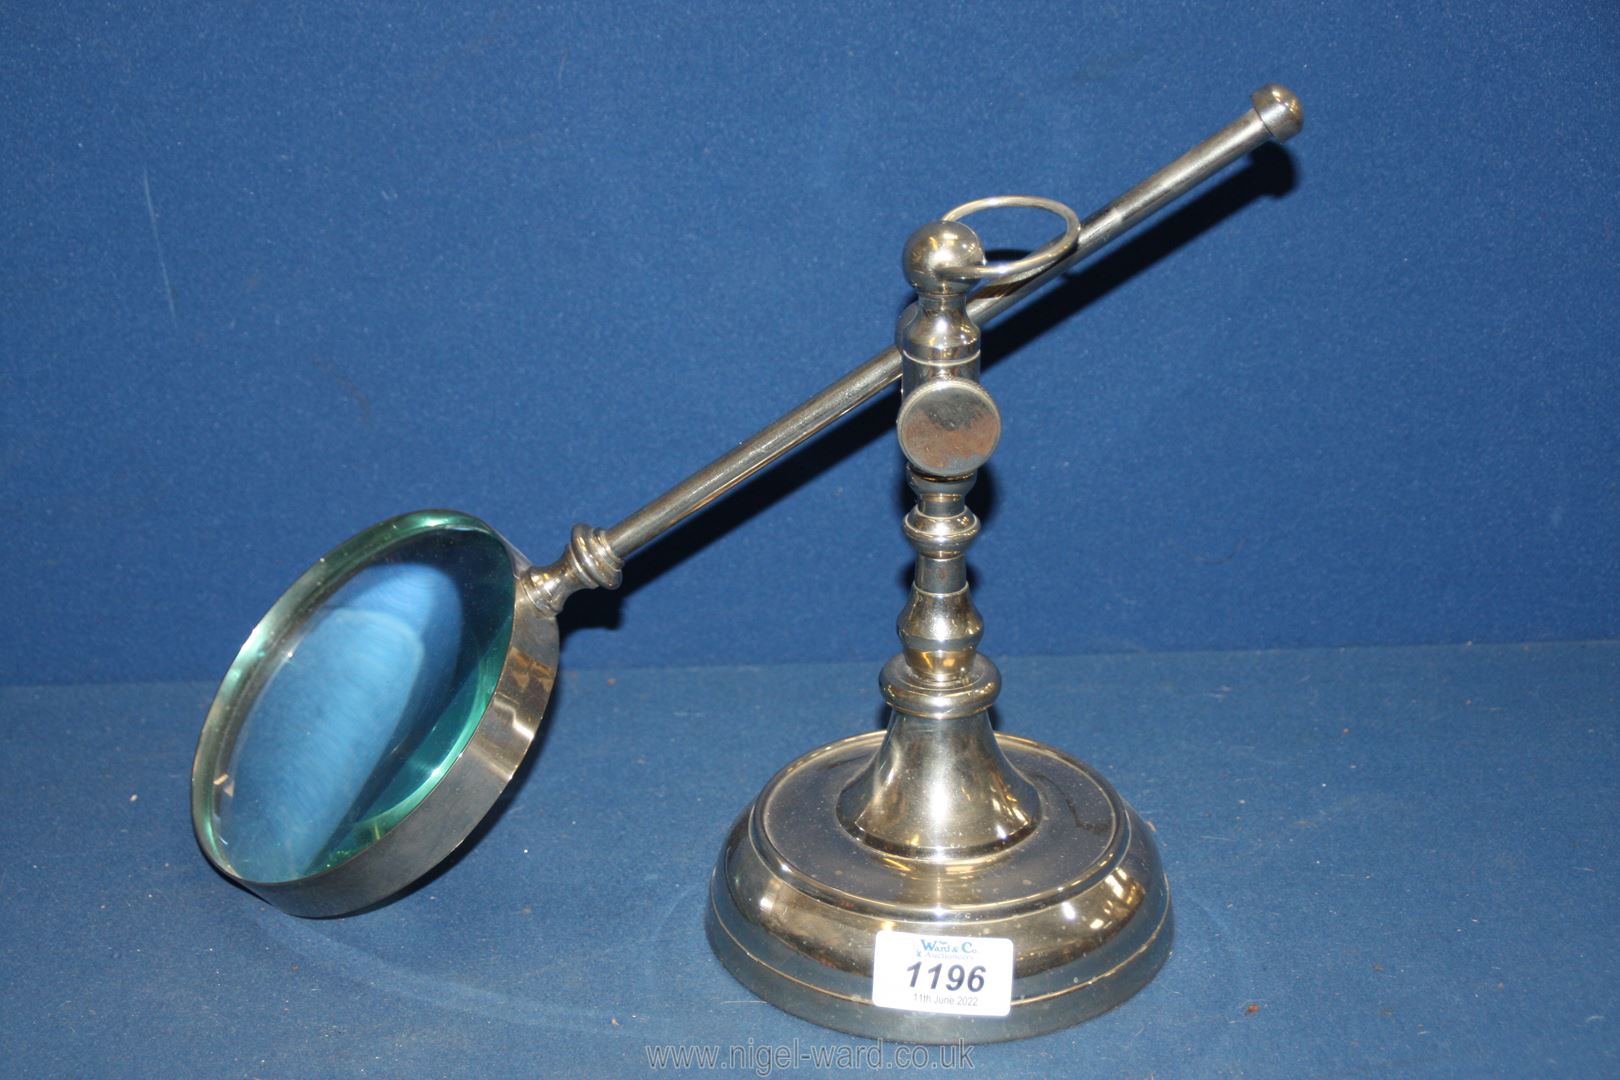 A metal magnifying glass on stand.